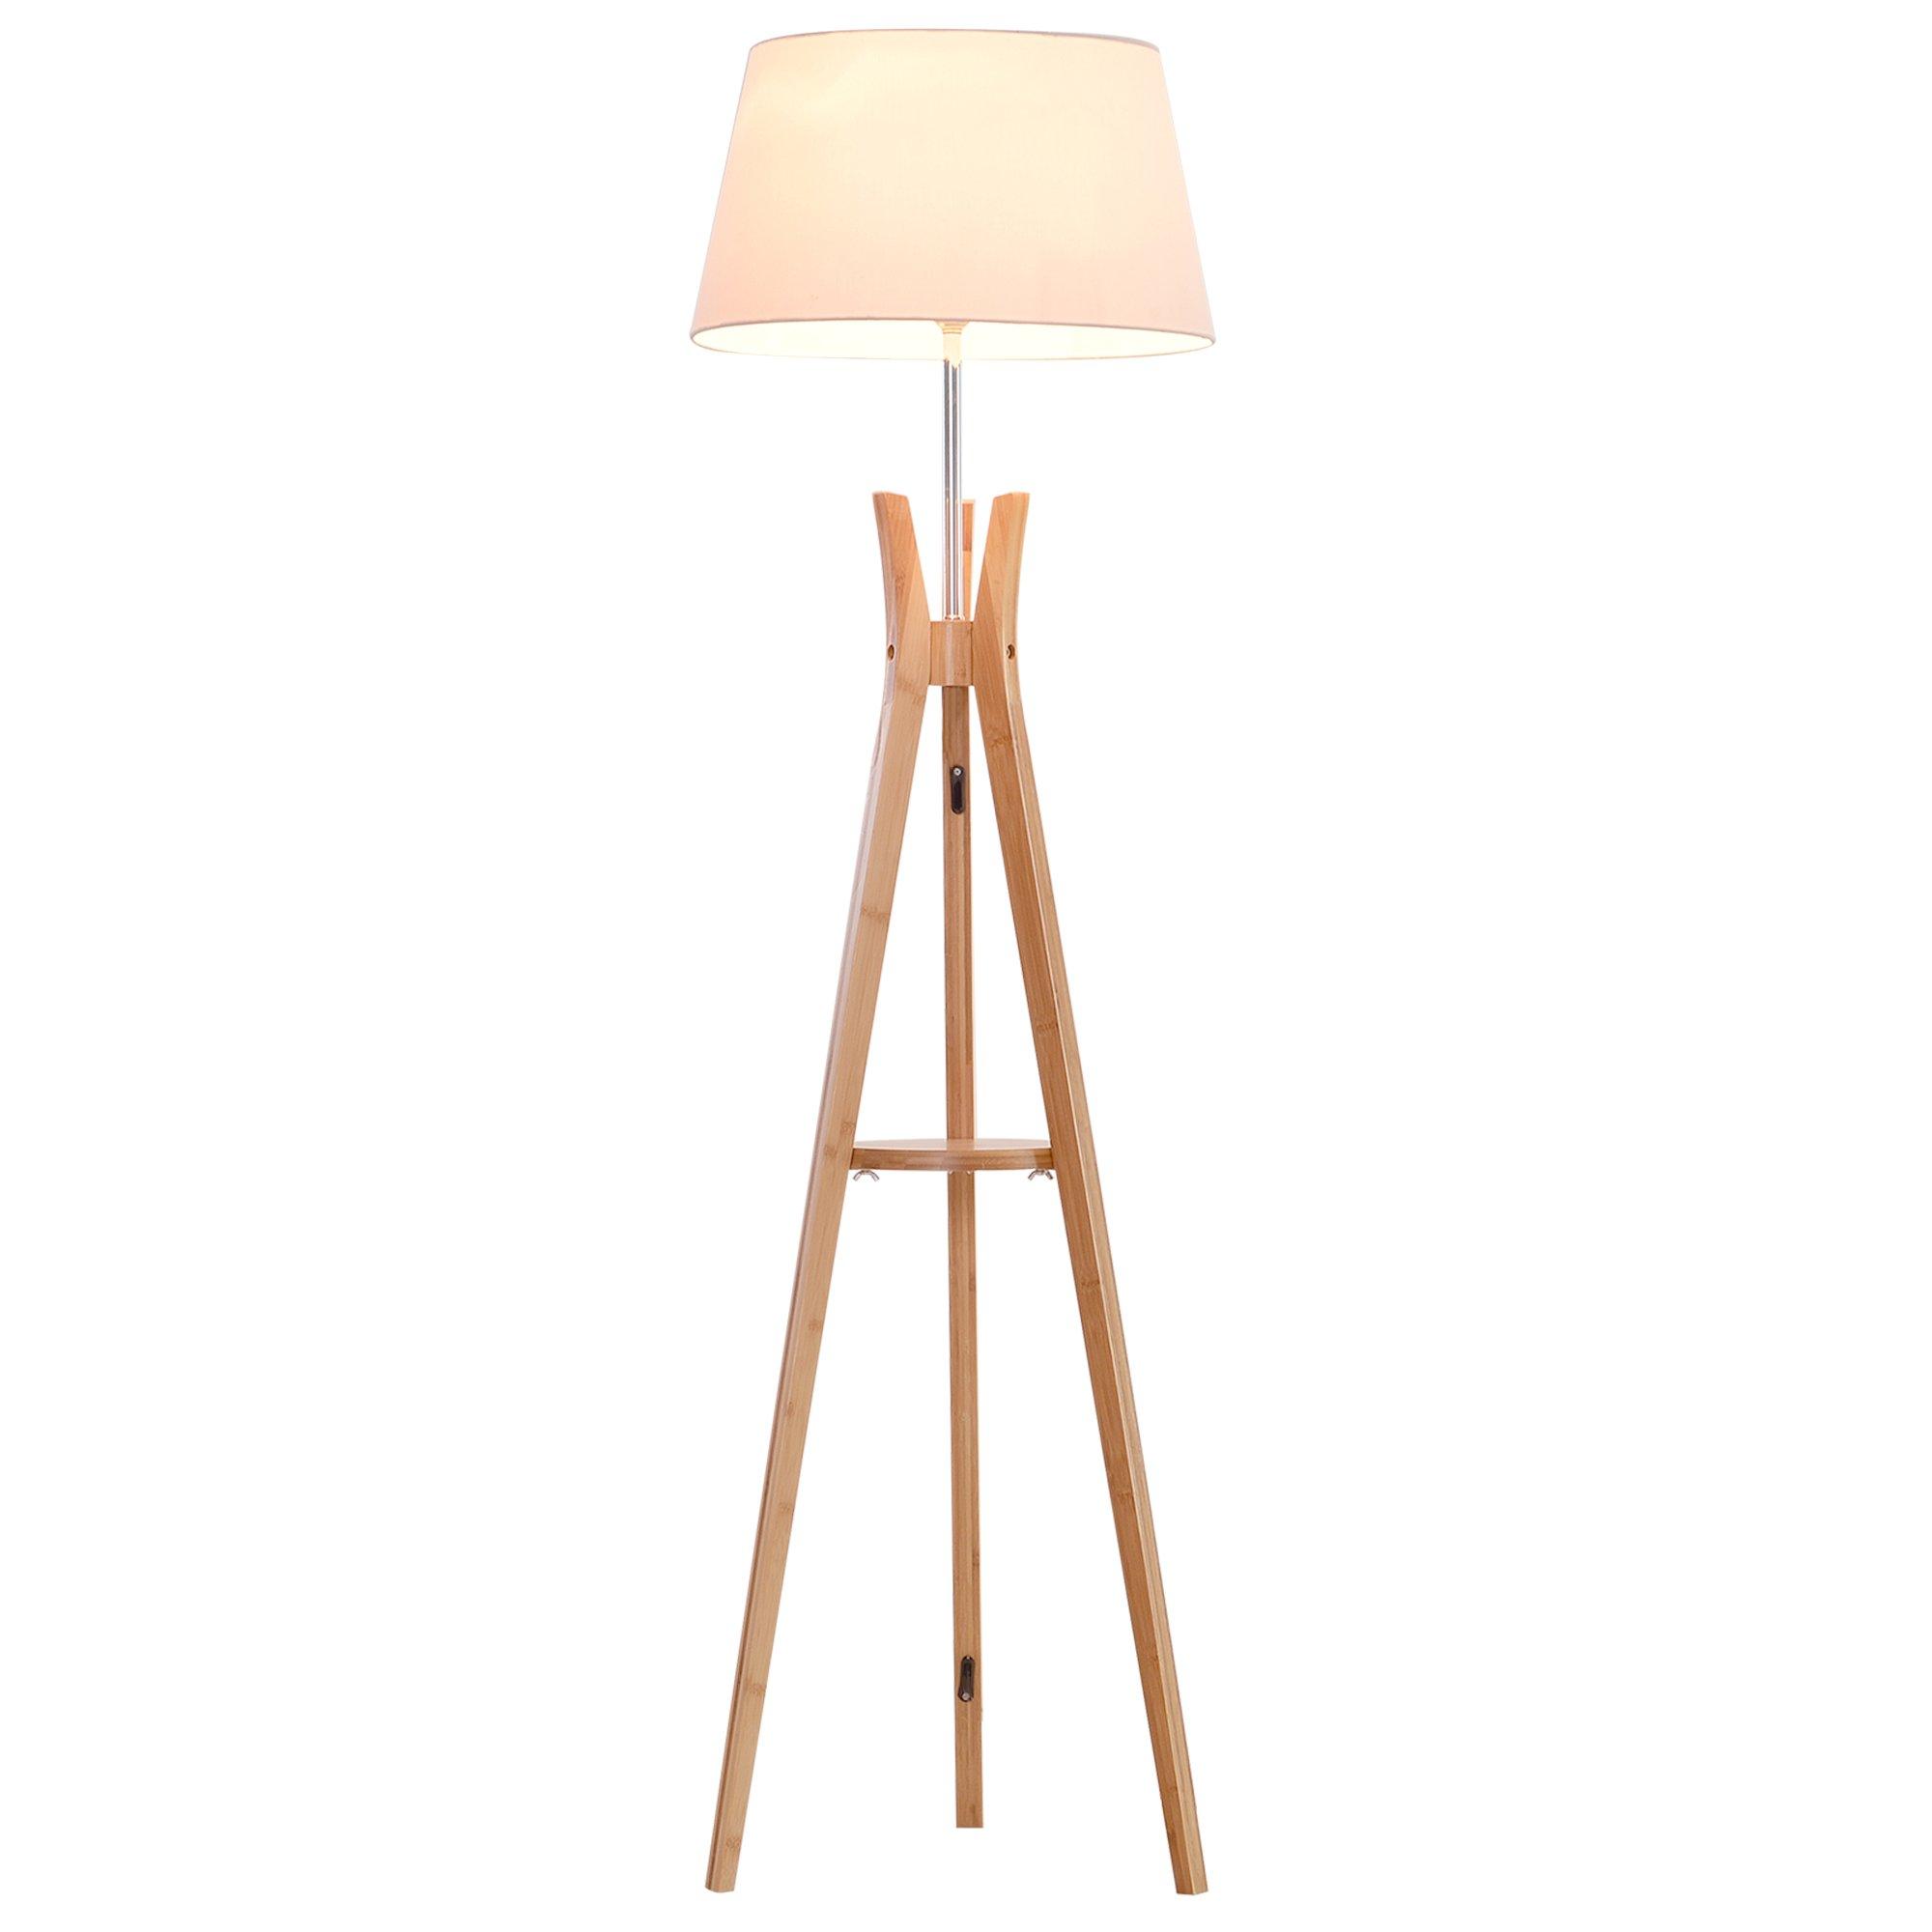 Floor Lamp 40W with Pedal Switch Middle Shelf Tripod Base Fabric Shade